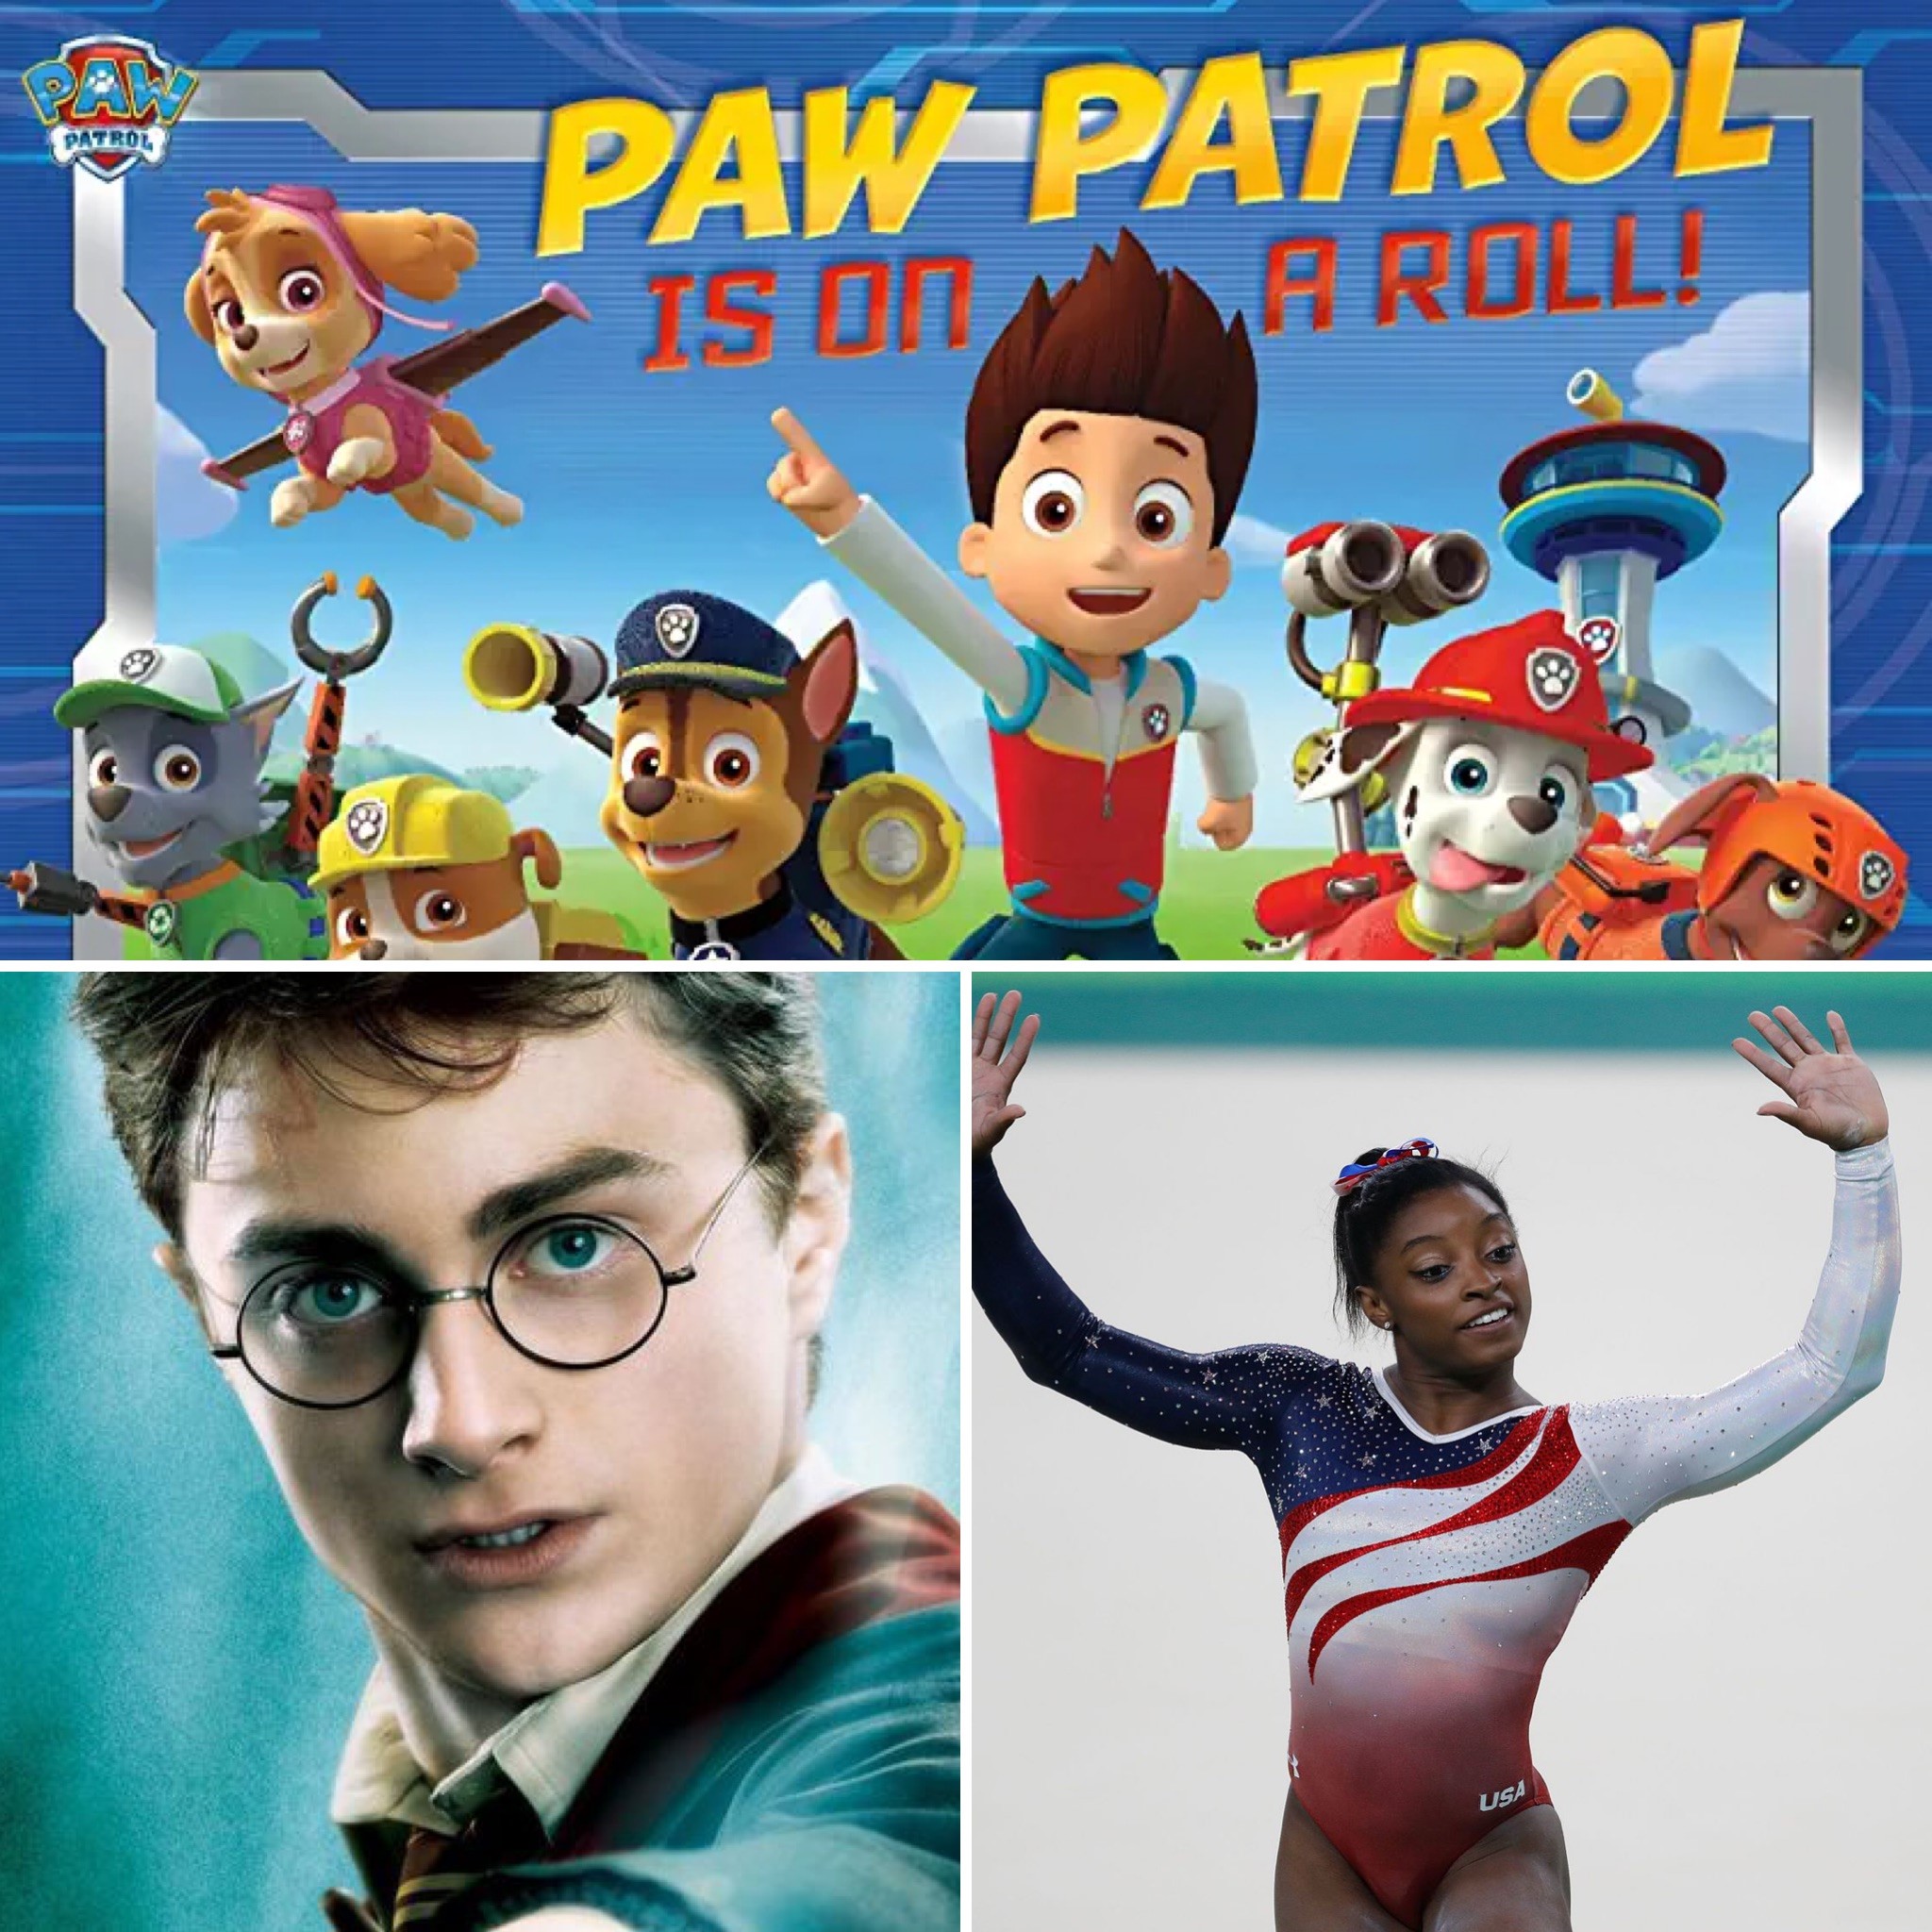 What Do Paw Potter and Simone Biles Have Common?